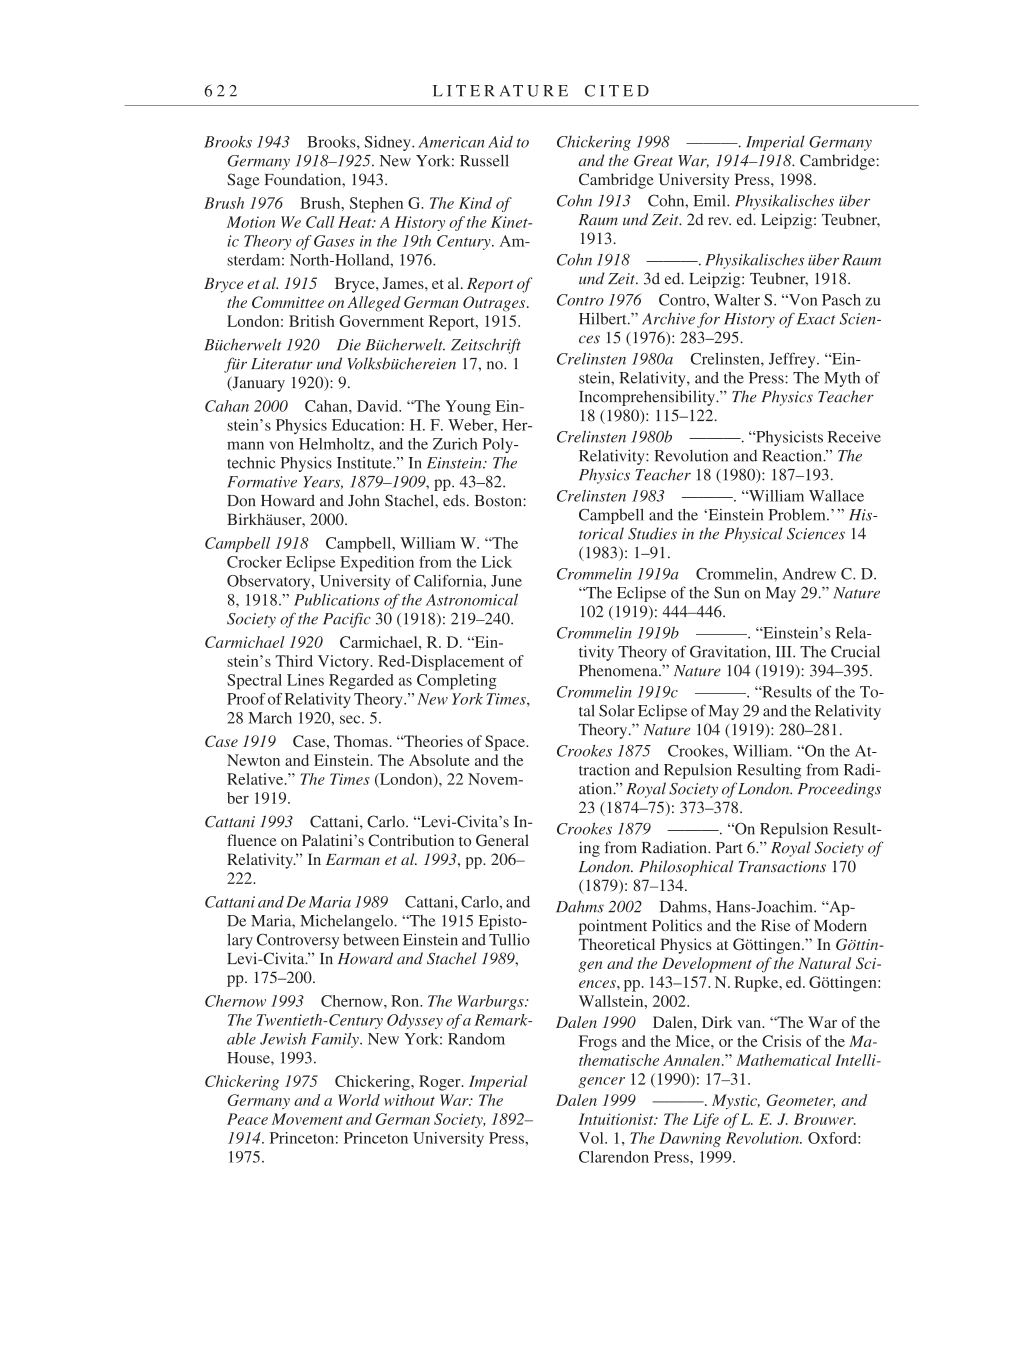 Volume 9: The Berlin Years: Correspondence January 1919-April 1920 page 622